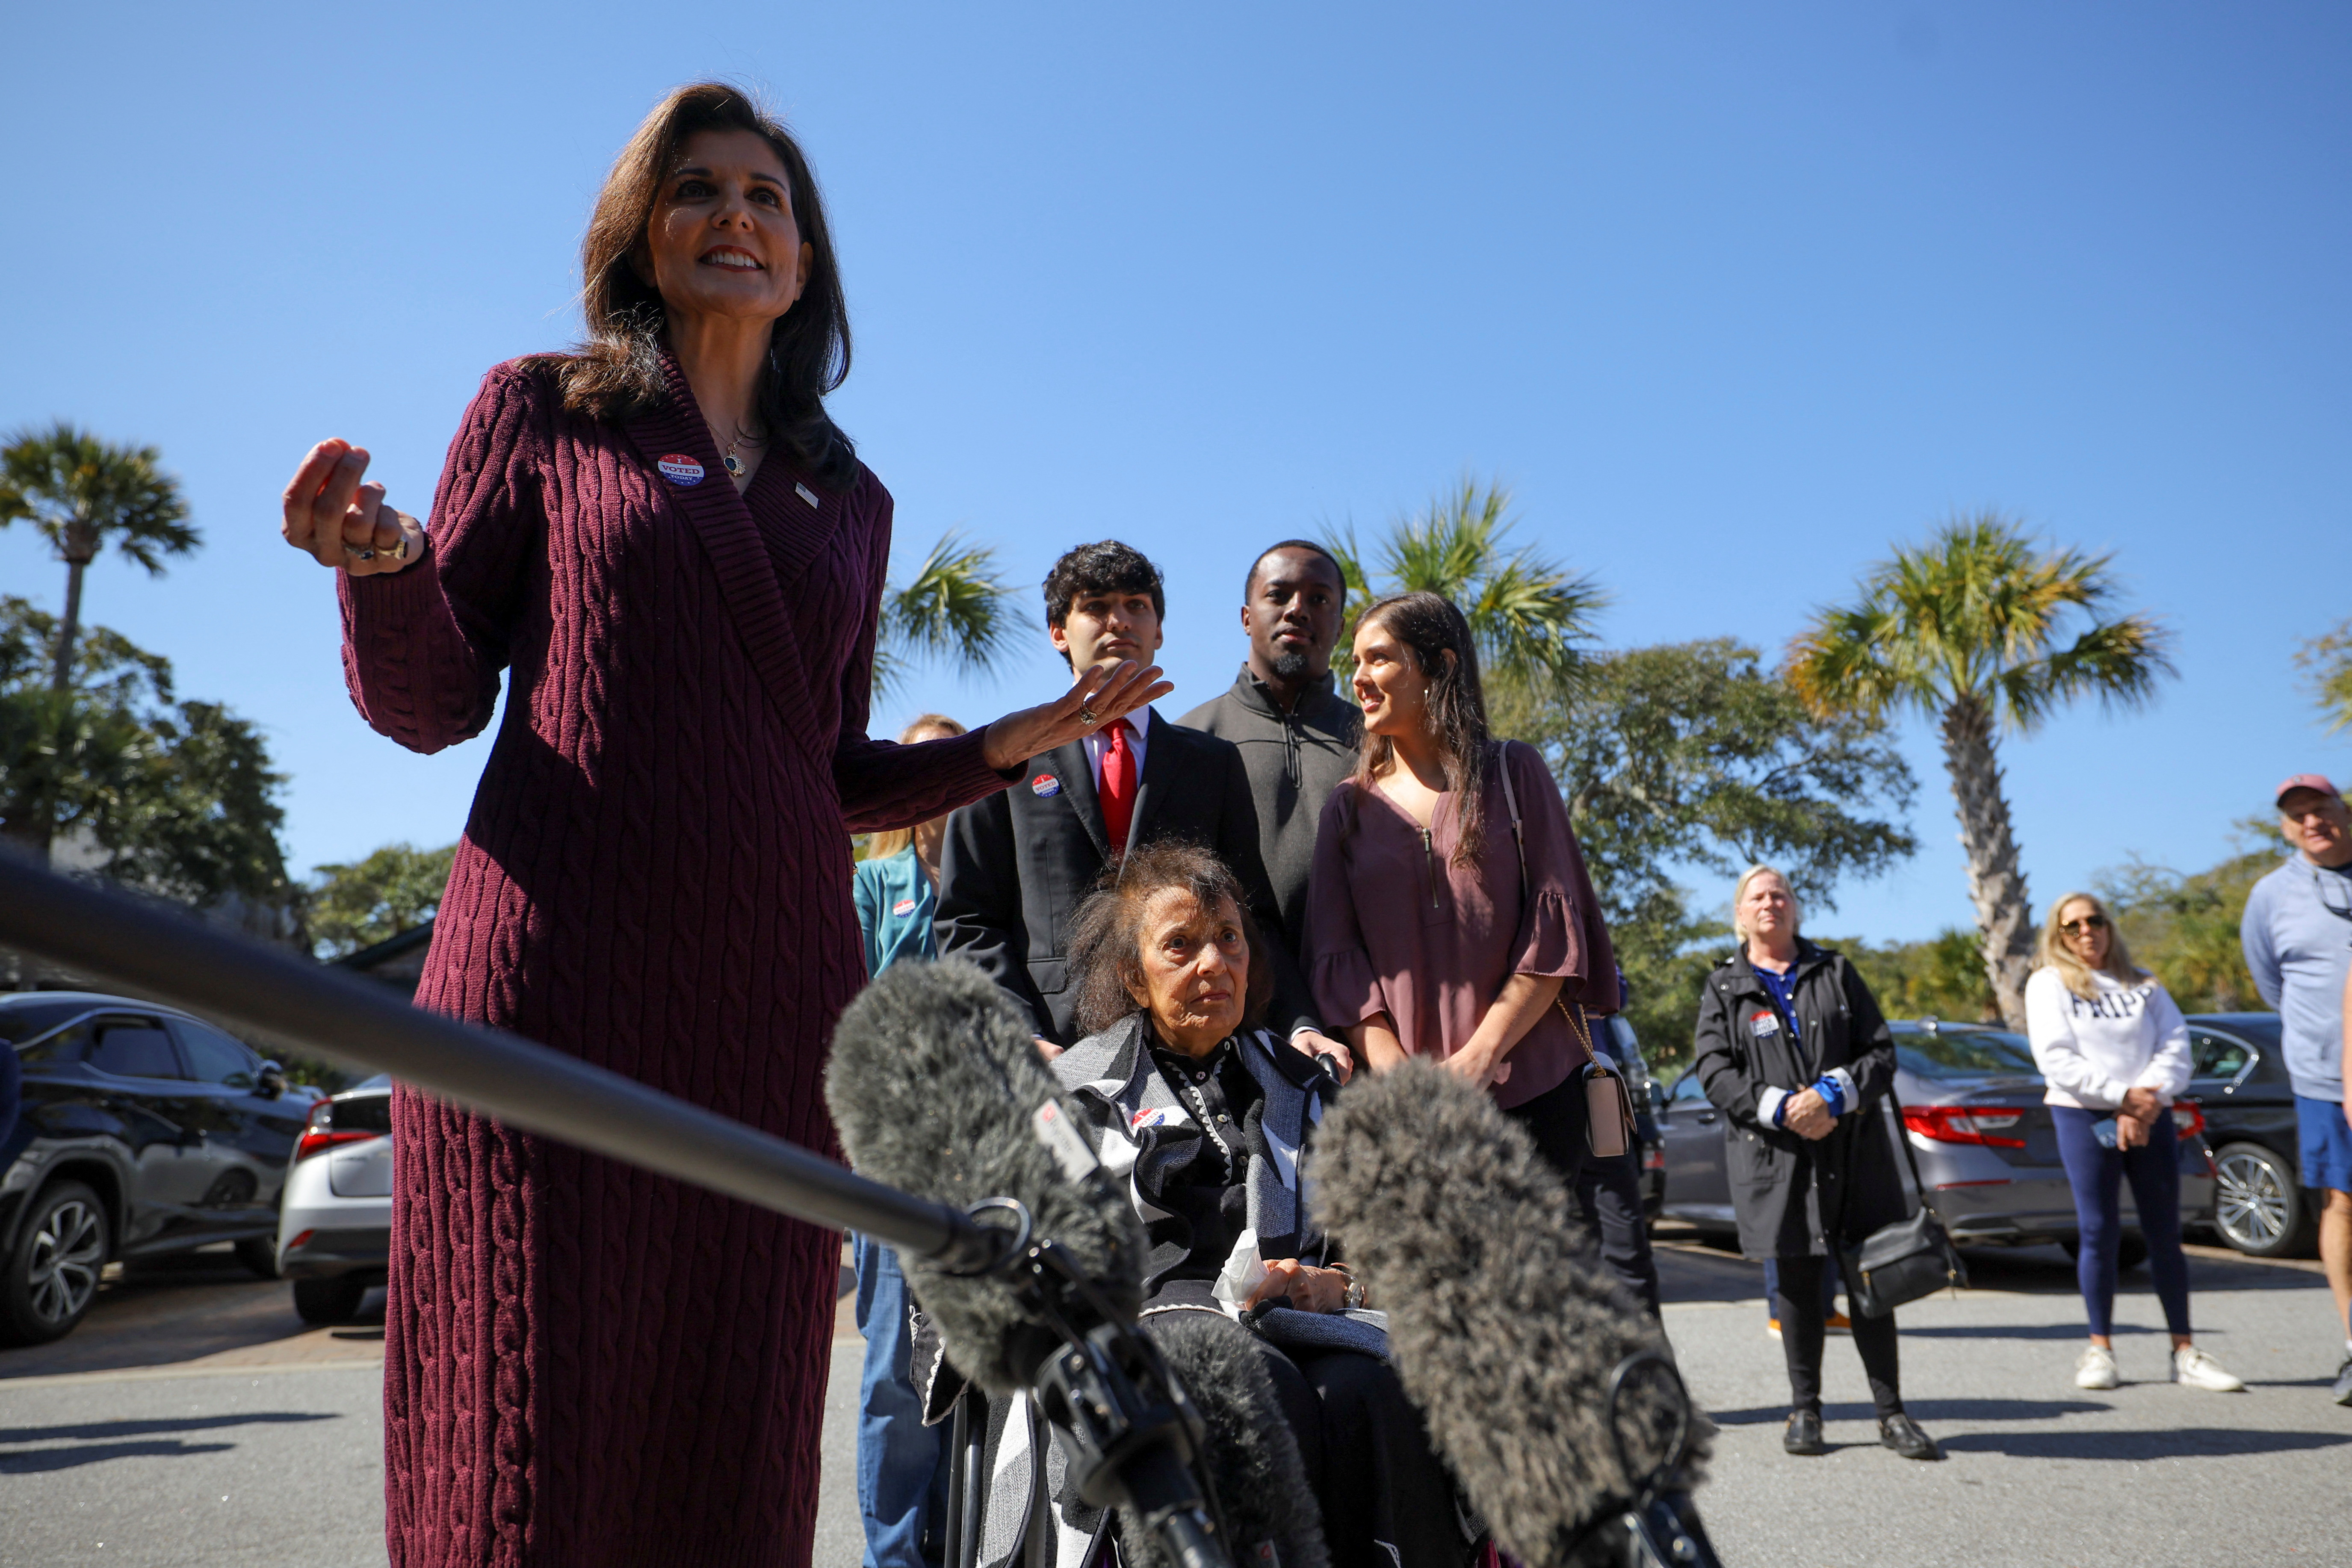 Republican presidential candidate Nikki Haley casts her vote in the South Carolina Republican presidential primary election, on Kiawah Island